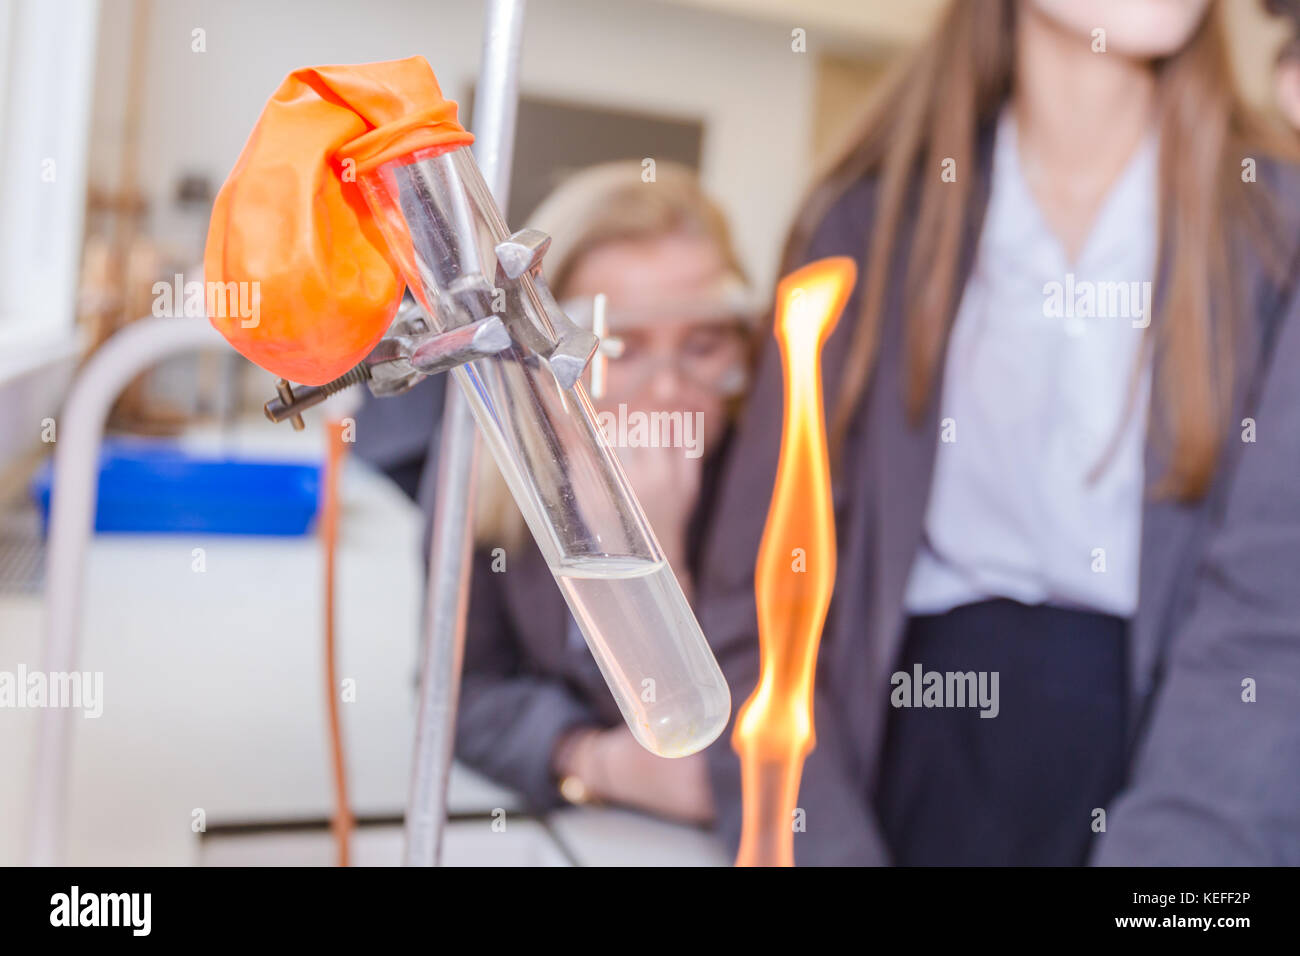 Secondary school UK science lesson with bunsen burner experiment Stock Photo